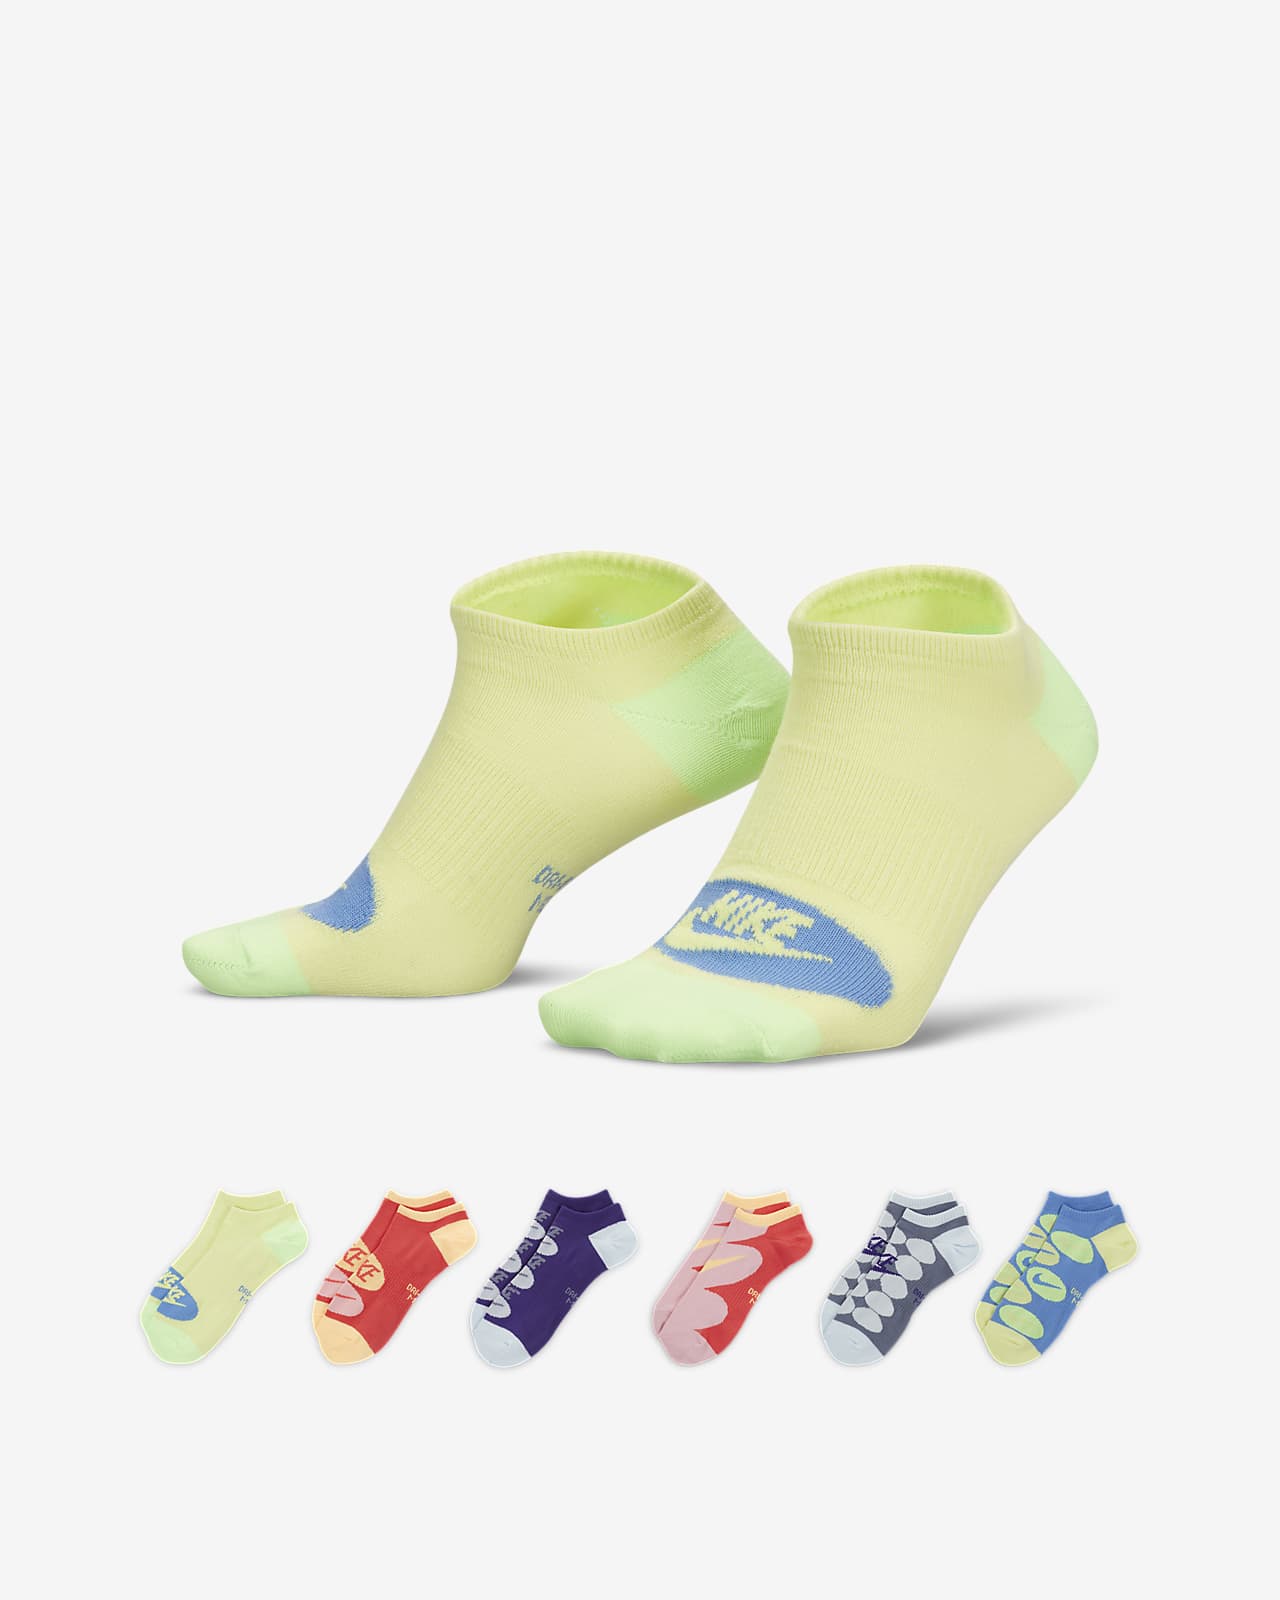 Chaussettes de training invisibles Nike Everyday Lightweight (6 paires)